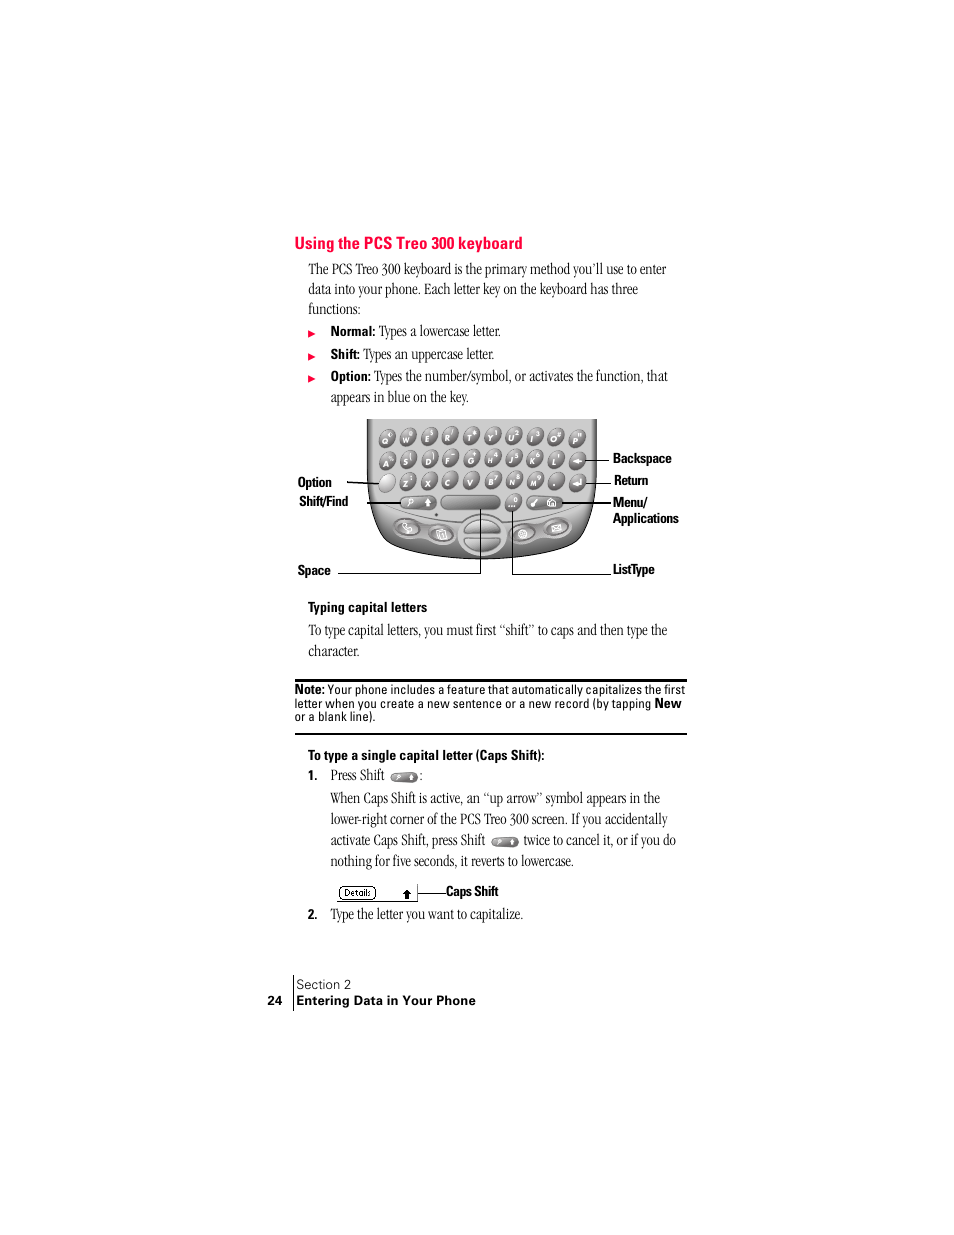 Using the pcs treo 300 keyboard, Typing capital letters, Types a lowercase letter | Types an uppercase letter, Type the letter you want to capitalize | Handspring Treo 300 User Manual | Page 32 / 286